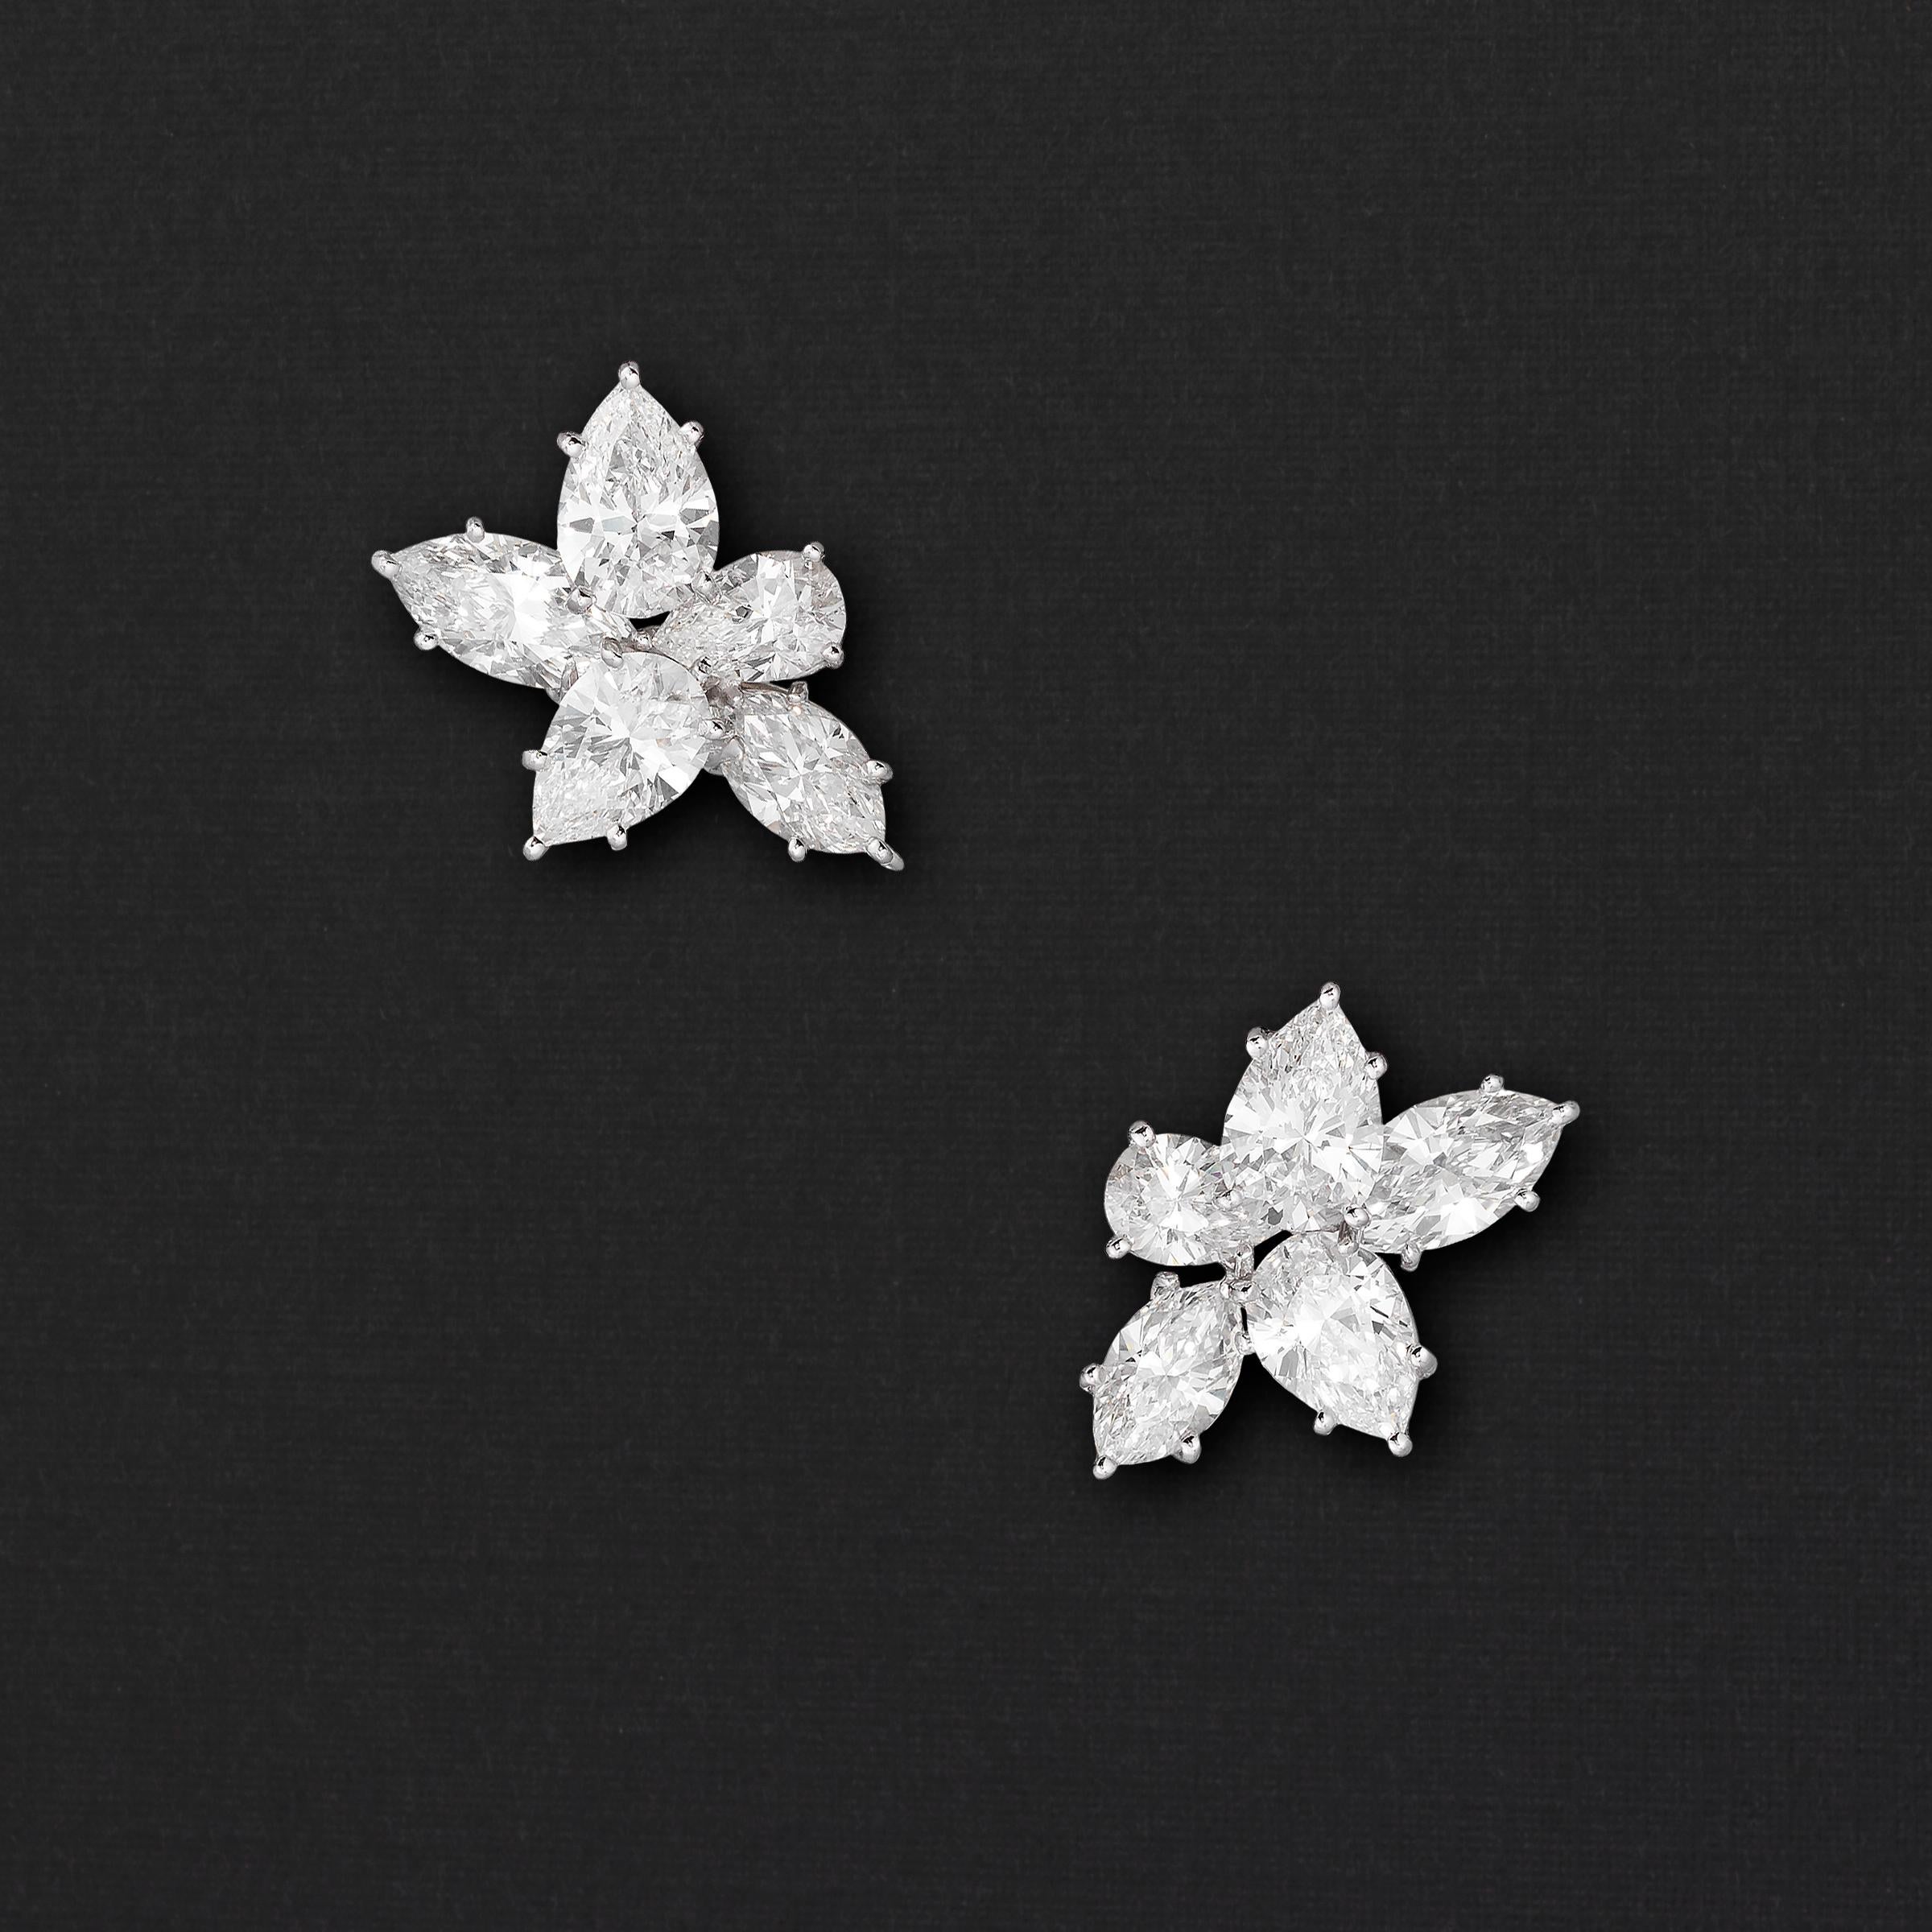 Mixed Cut Harry Winston Classic Diamond Cluster Earrings in Platinum and 18K Gold For Sale